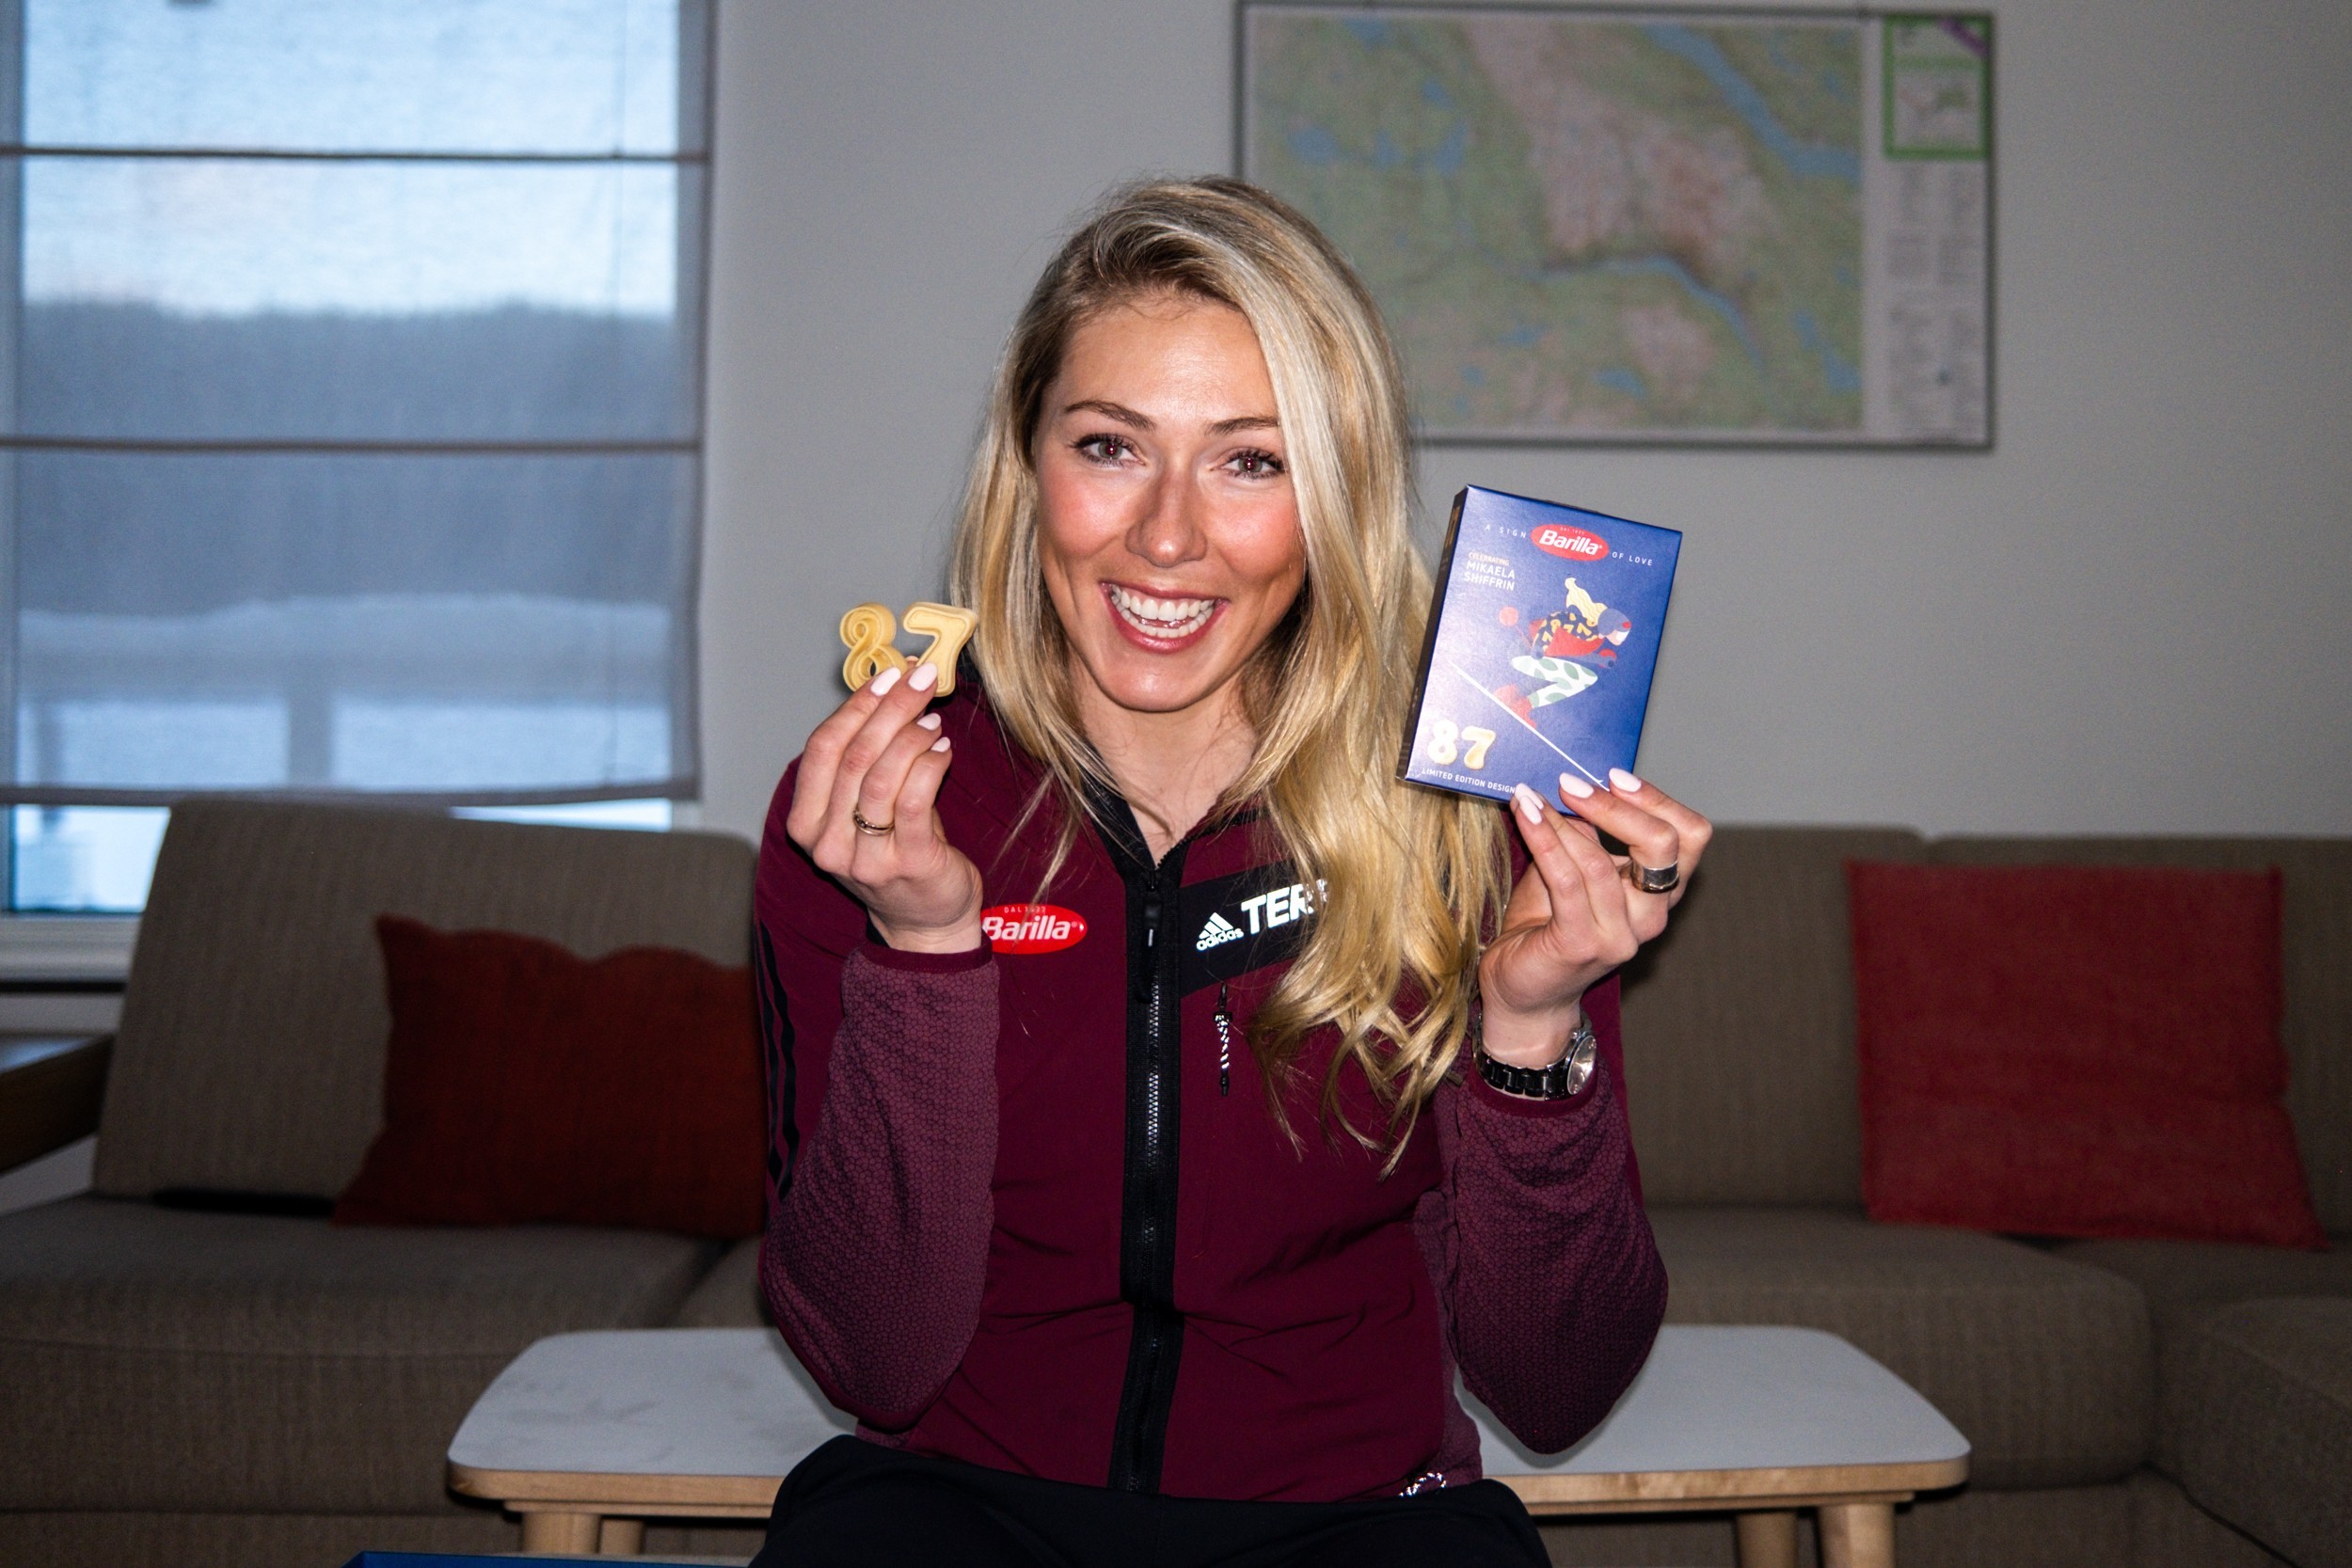 Barilla & Mikaela Shiffrin: Greatness starts with a great recipe - Pack No. 21 